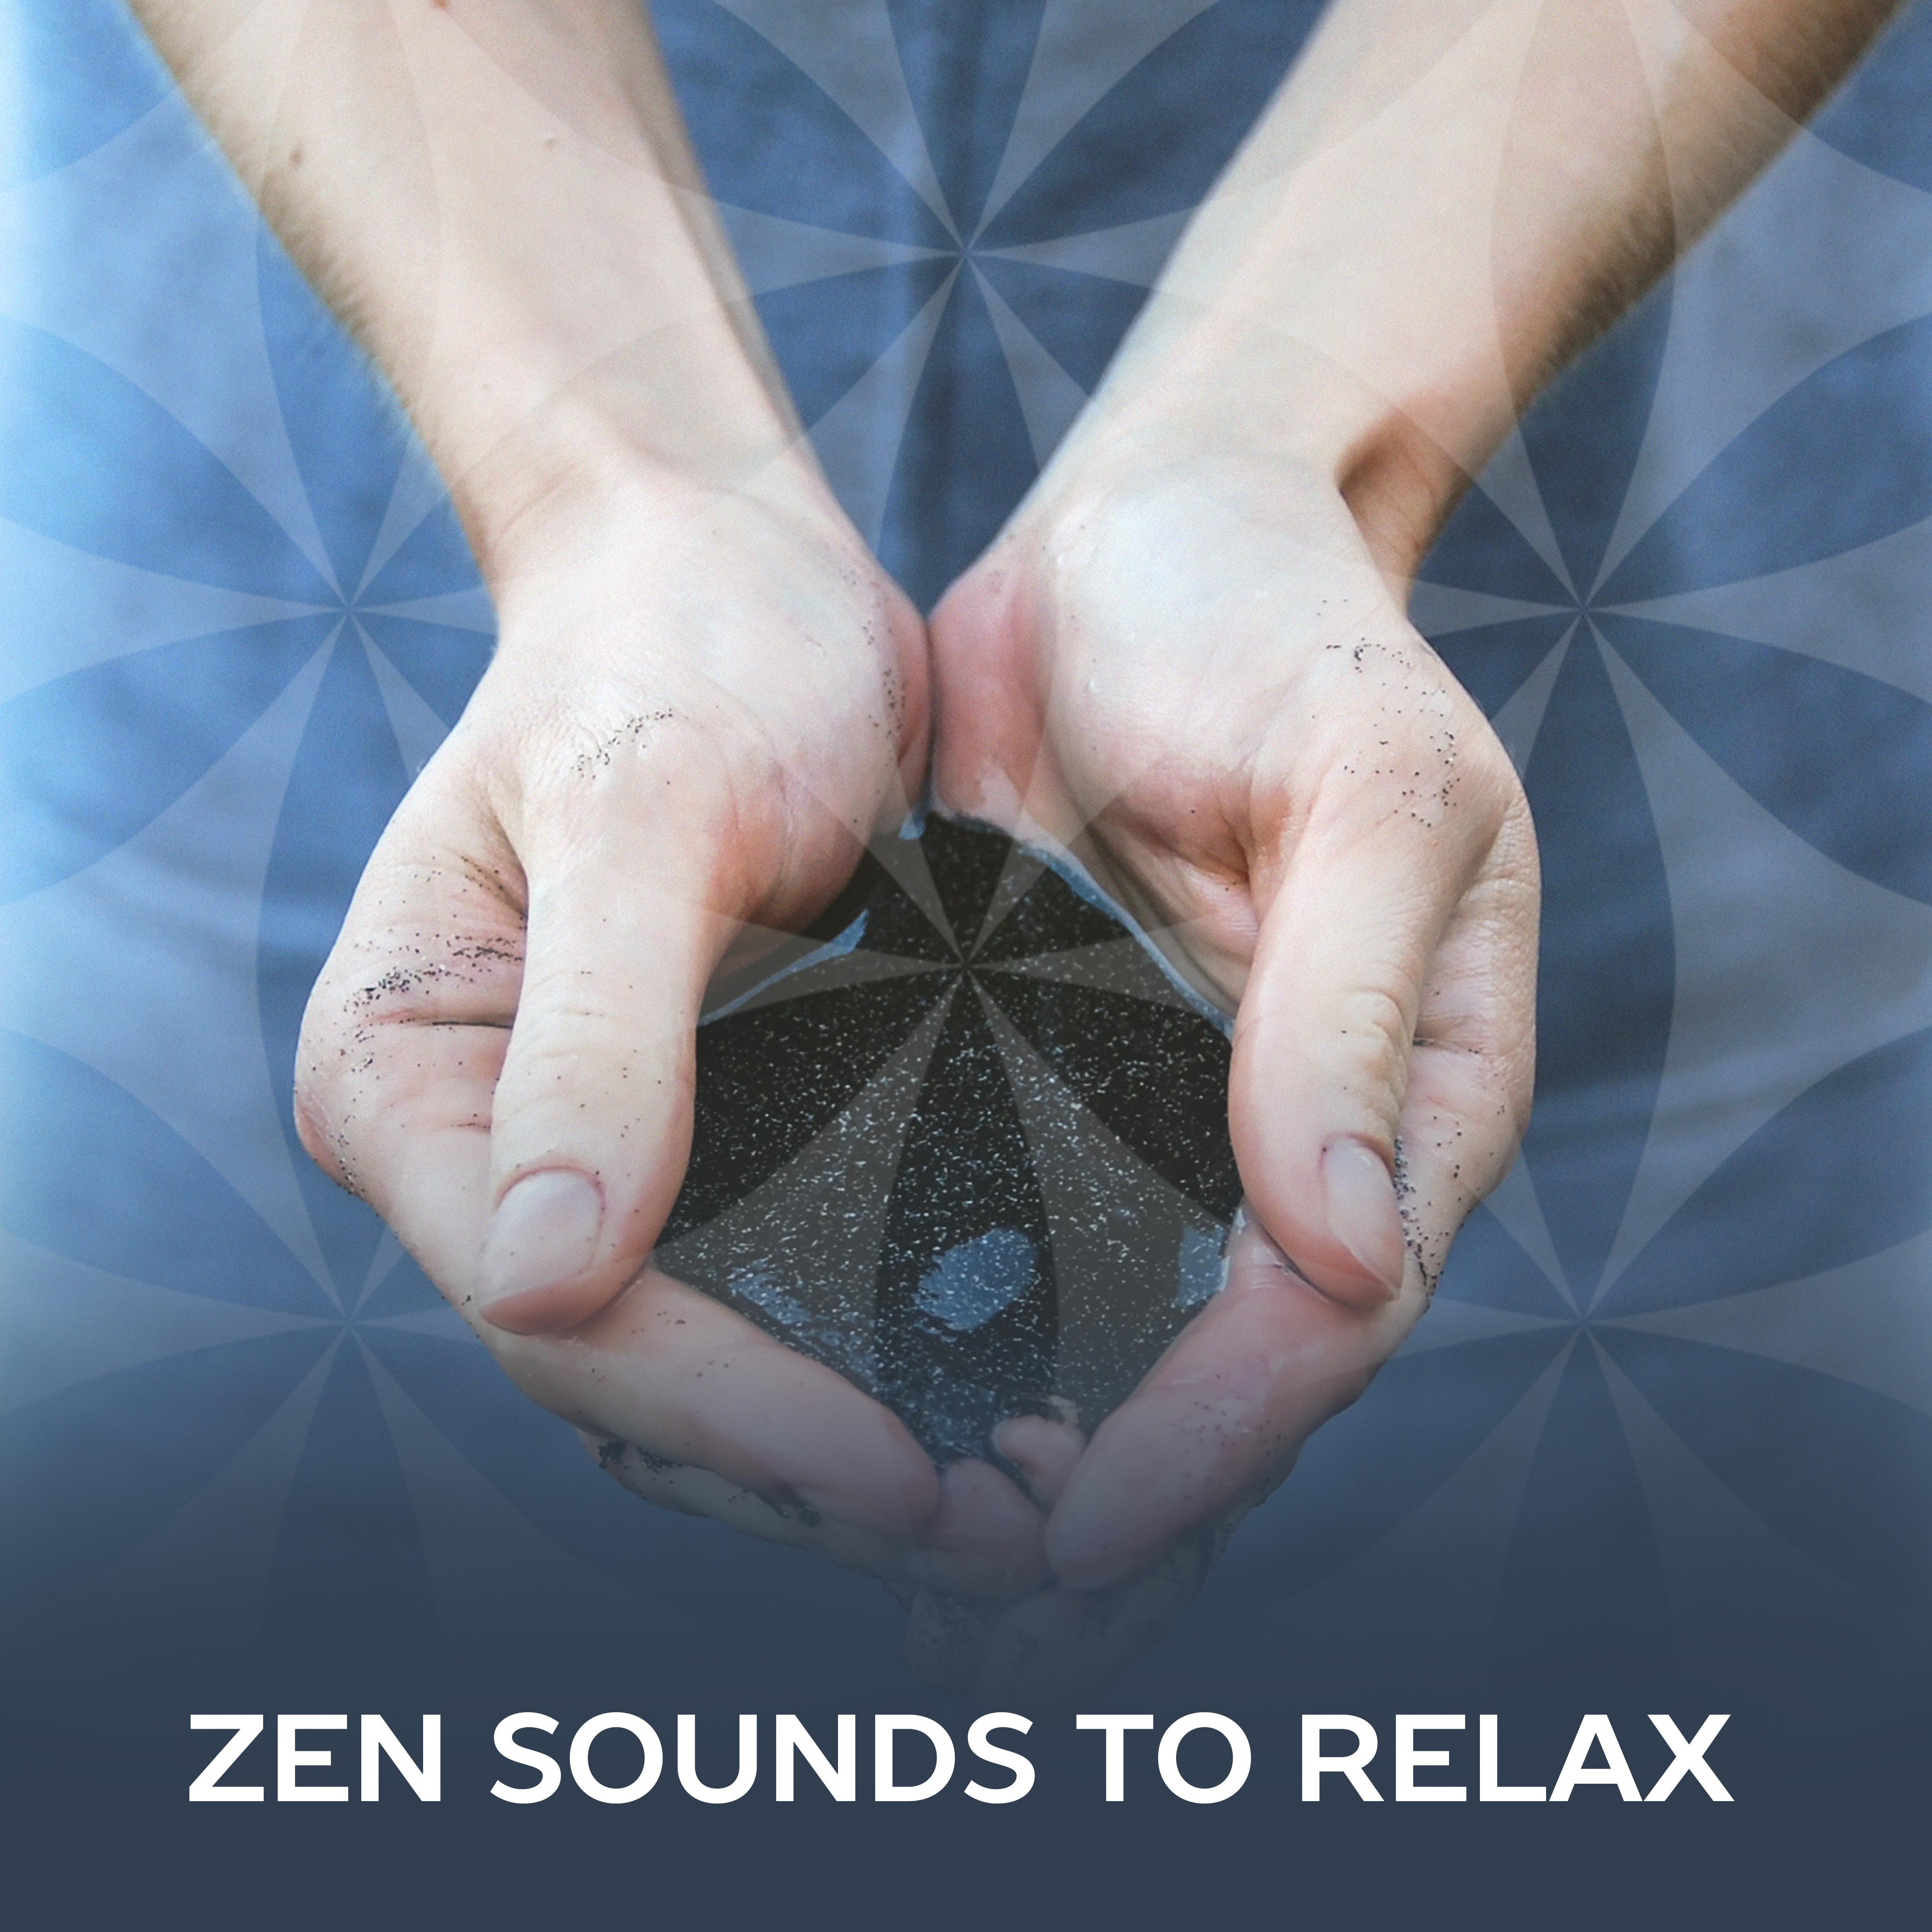 Zen Sounds to Relax – Soothing Music, Rest & Relax, Zen Meditation Sounds, Buddha Lounge